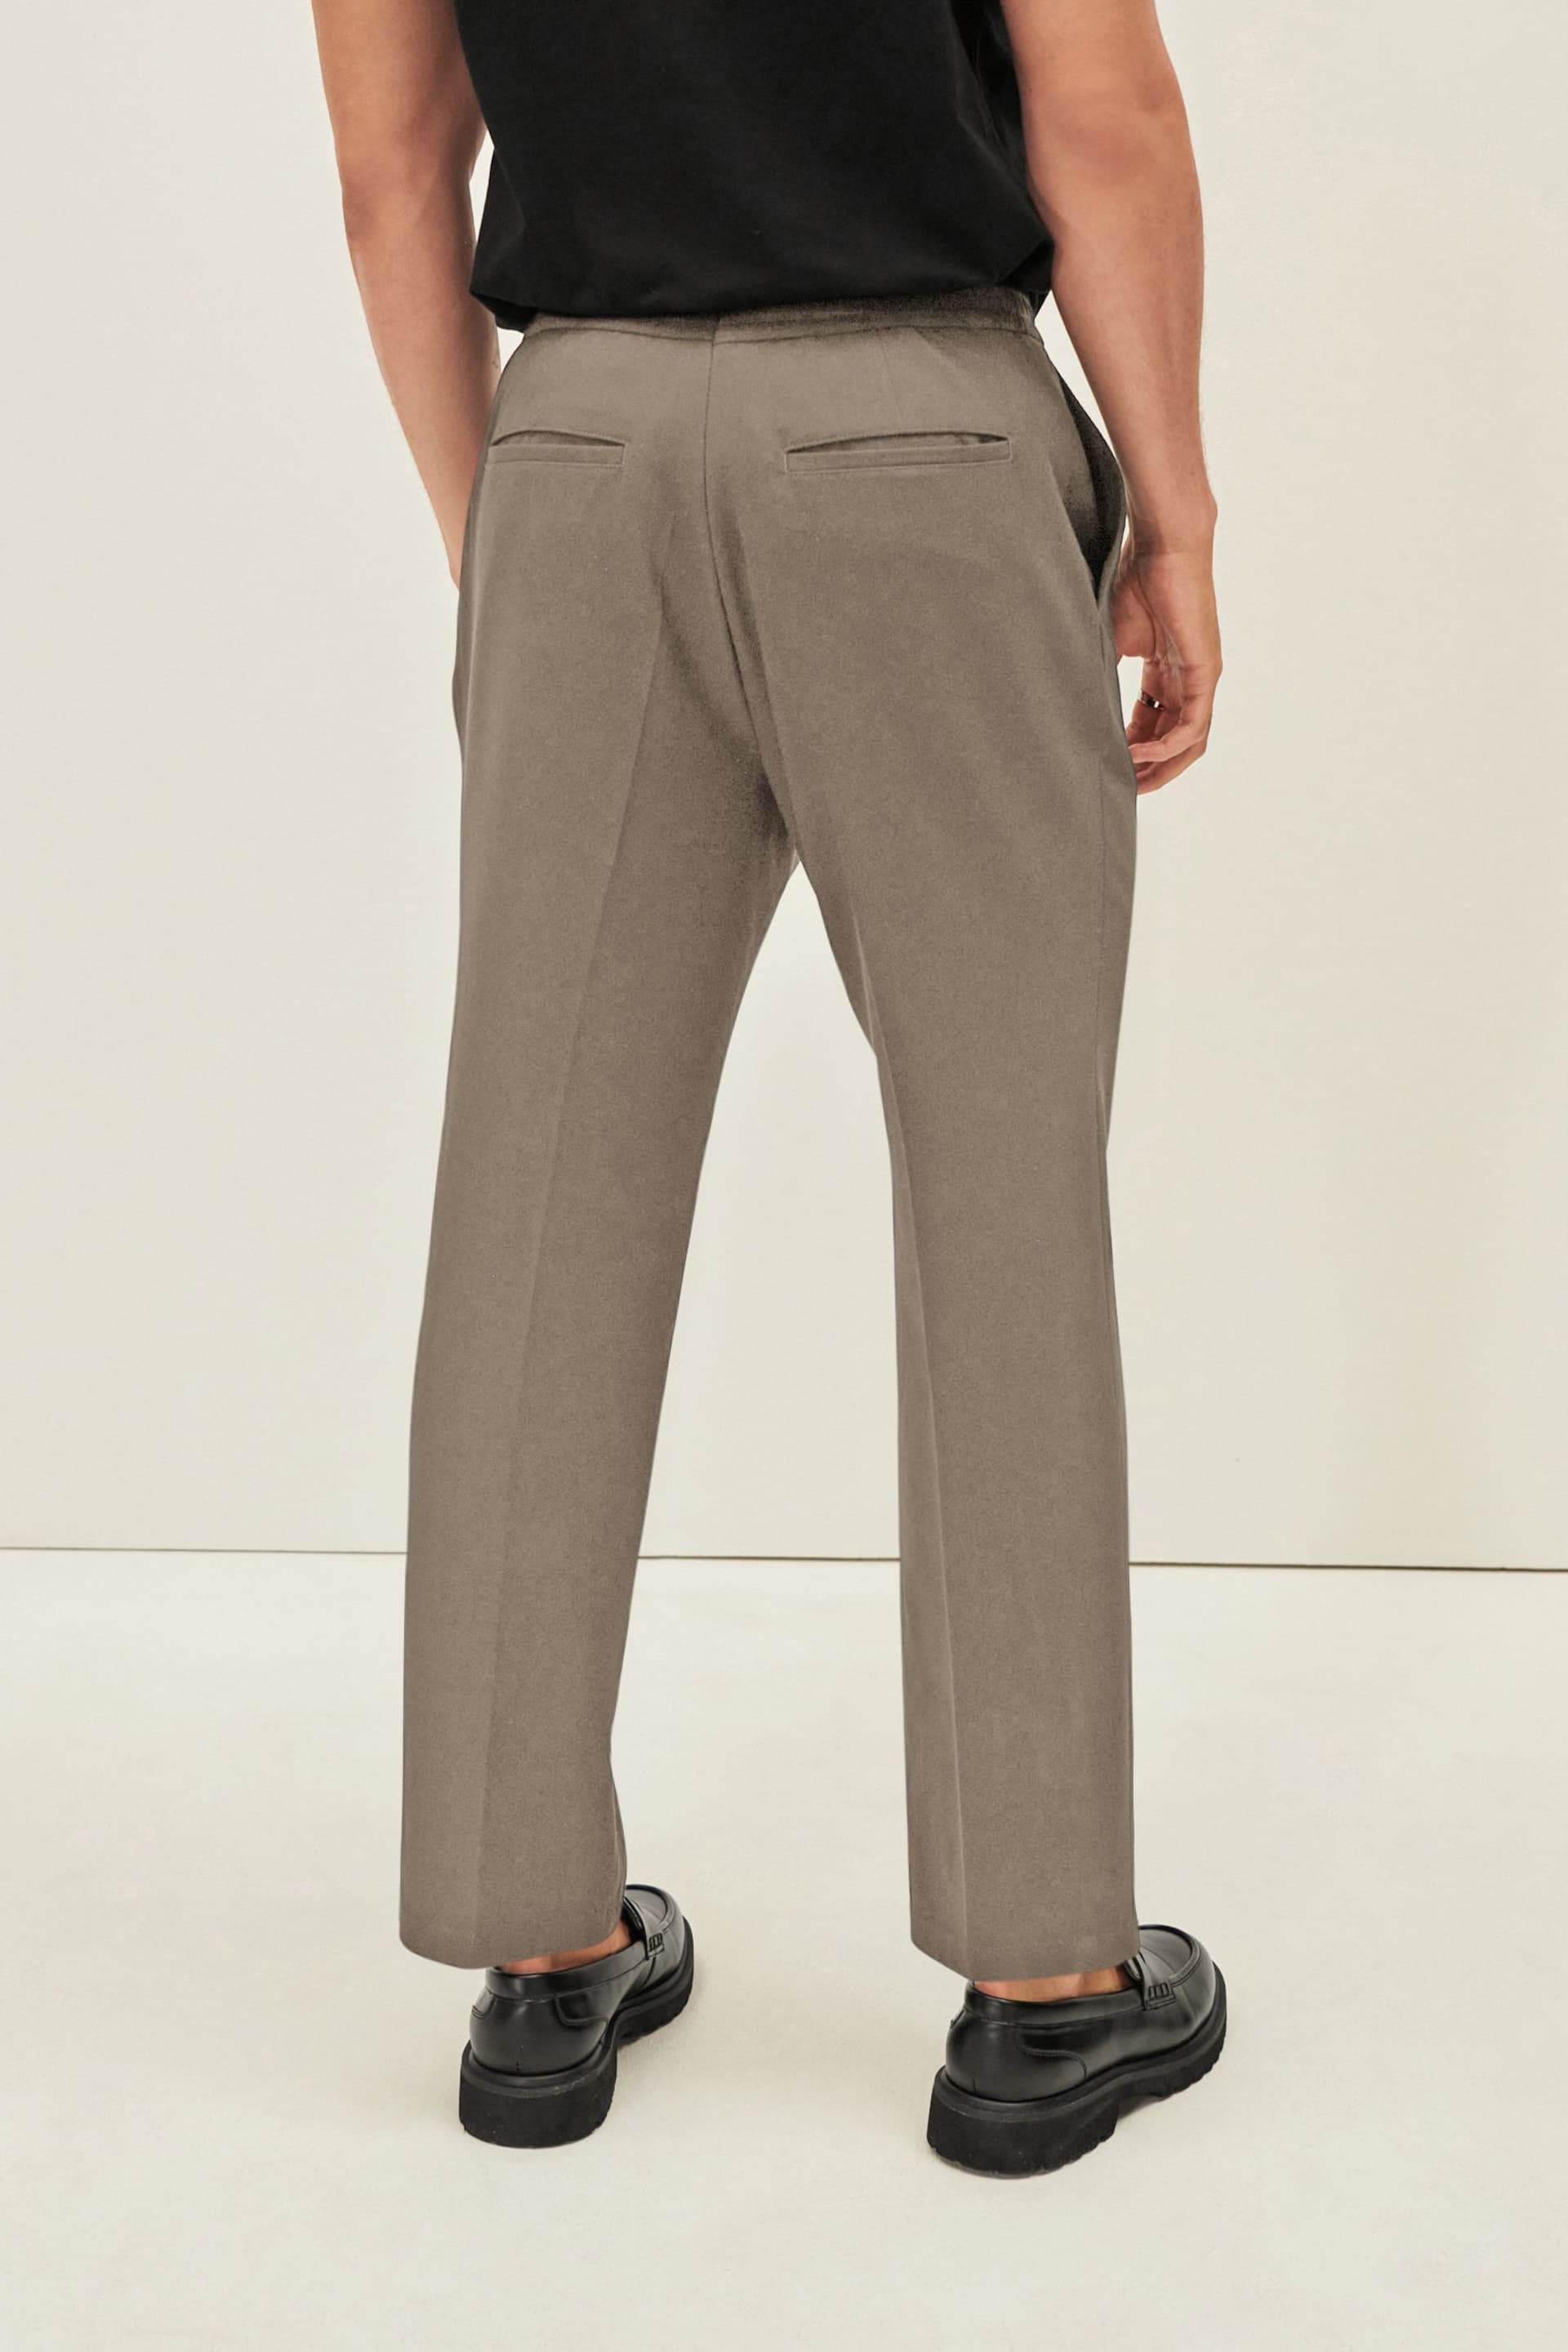 Neutral Relaxed Fit EDIT Jogger Trousers - Image 3 of 7